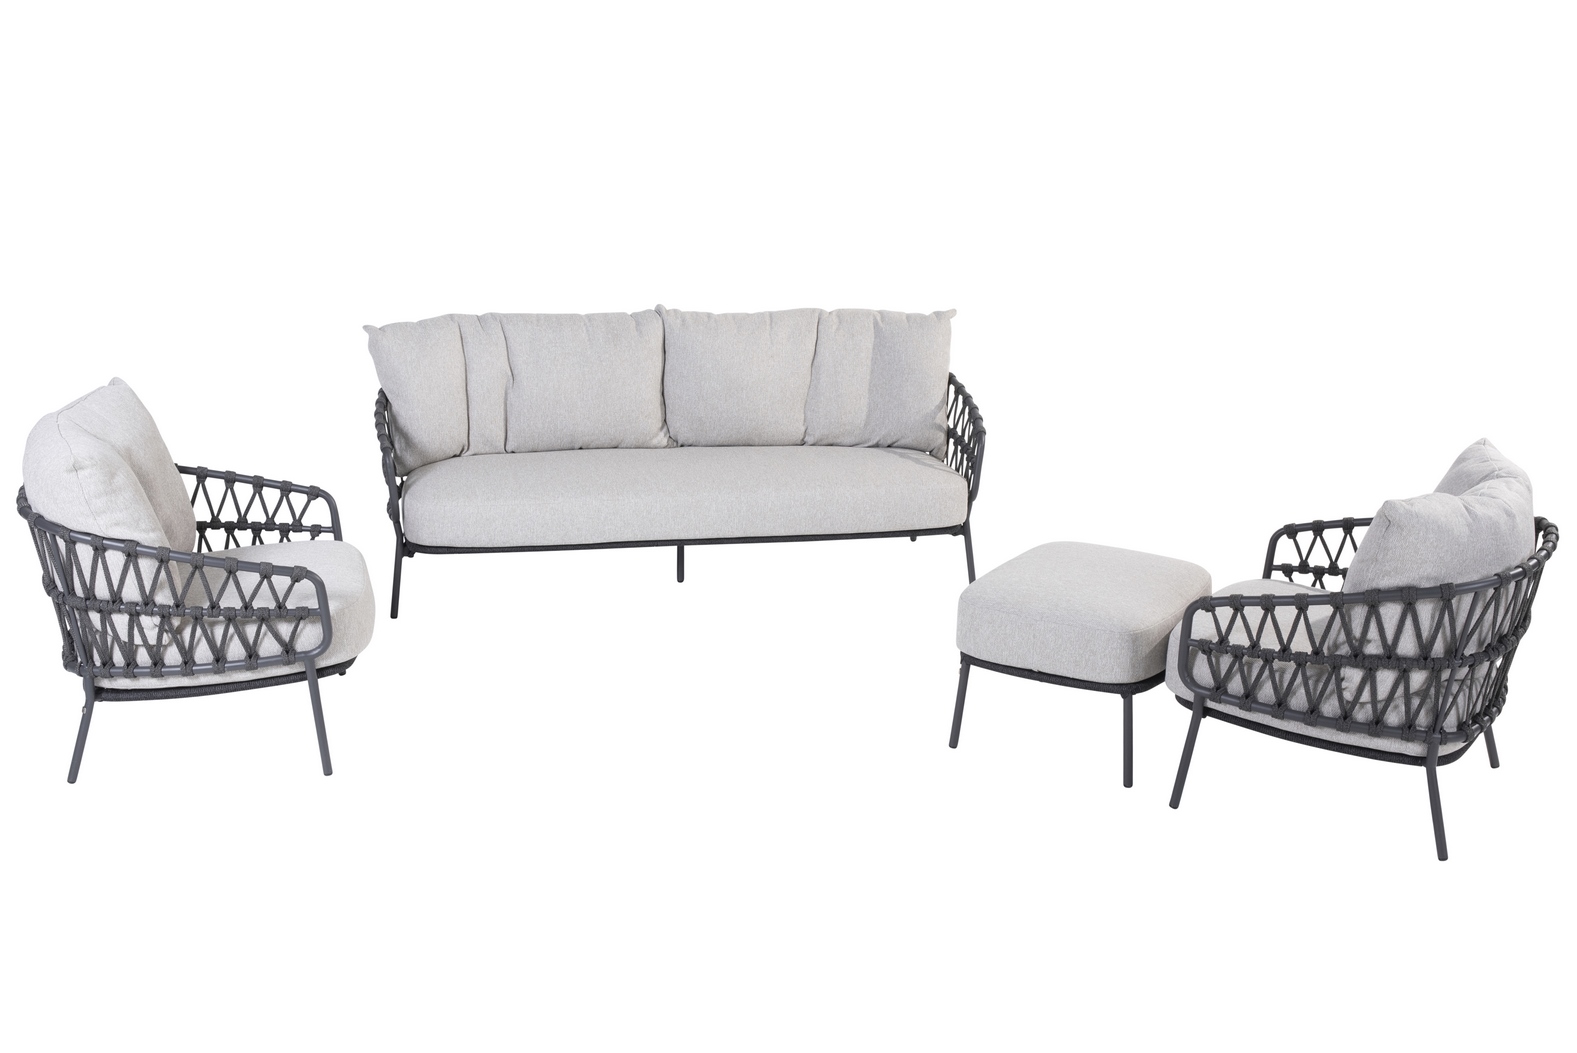 213891-213892-213893__Calpi_living_set_and_footstool_without_table_01.jpg